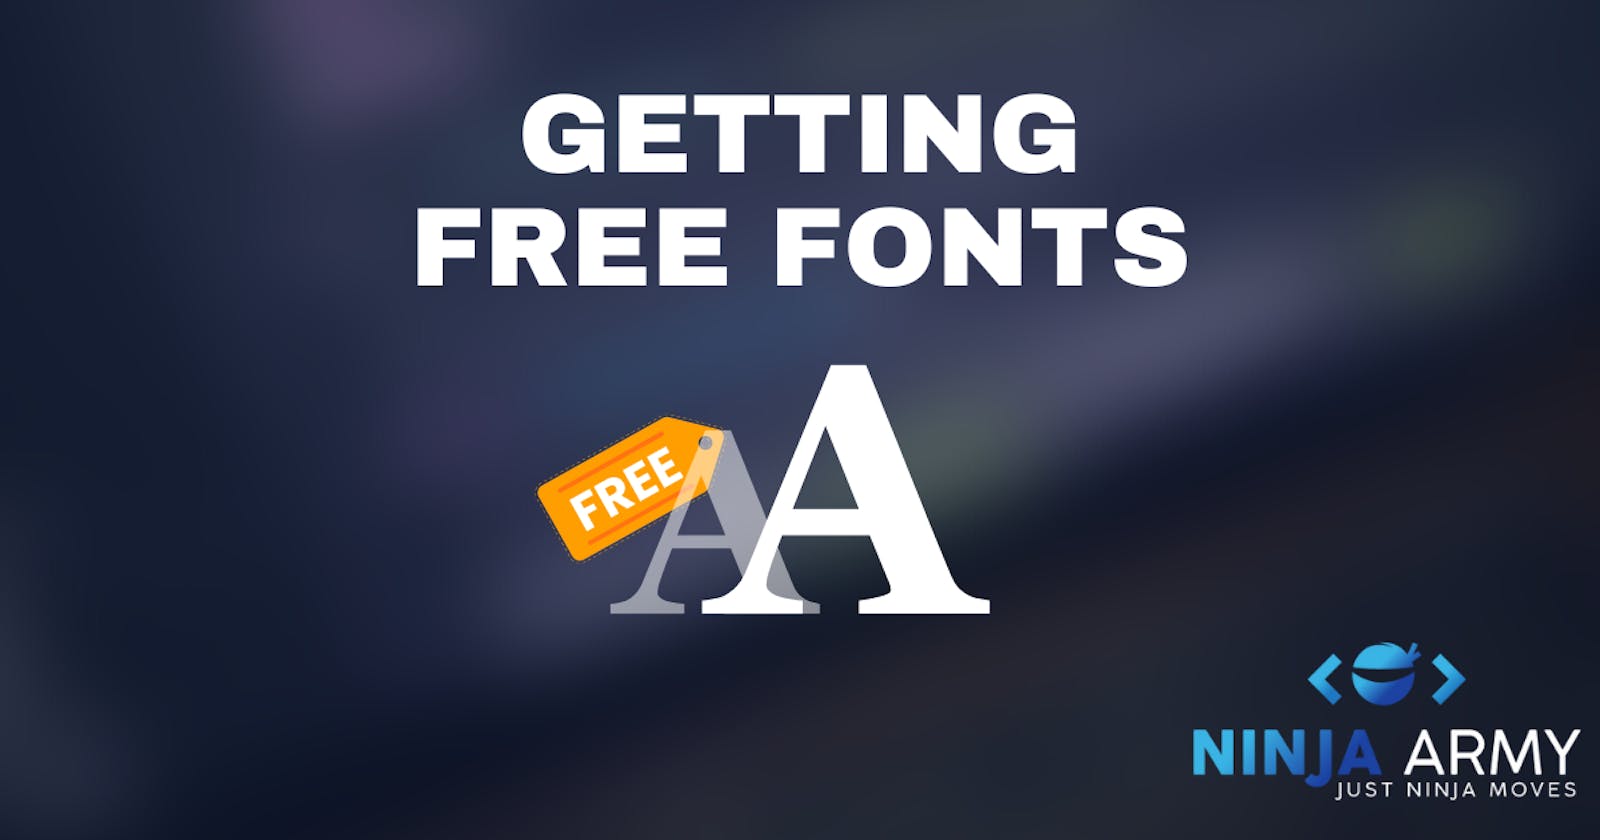 7 best places to get FREE fonts